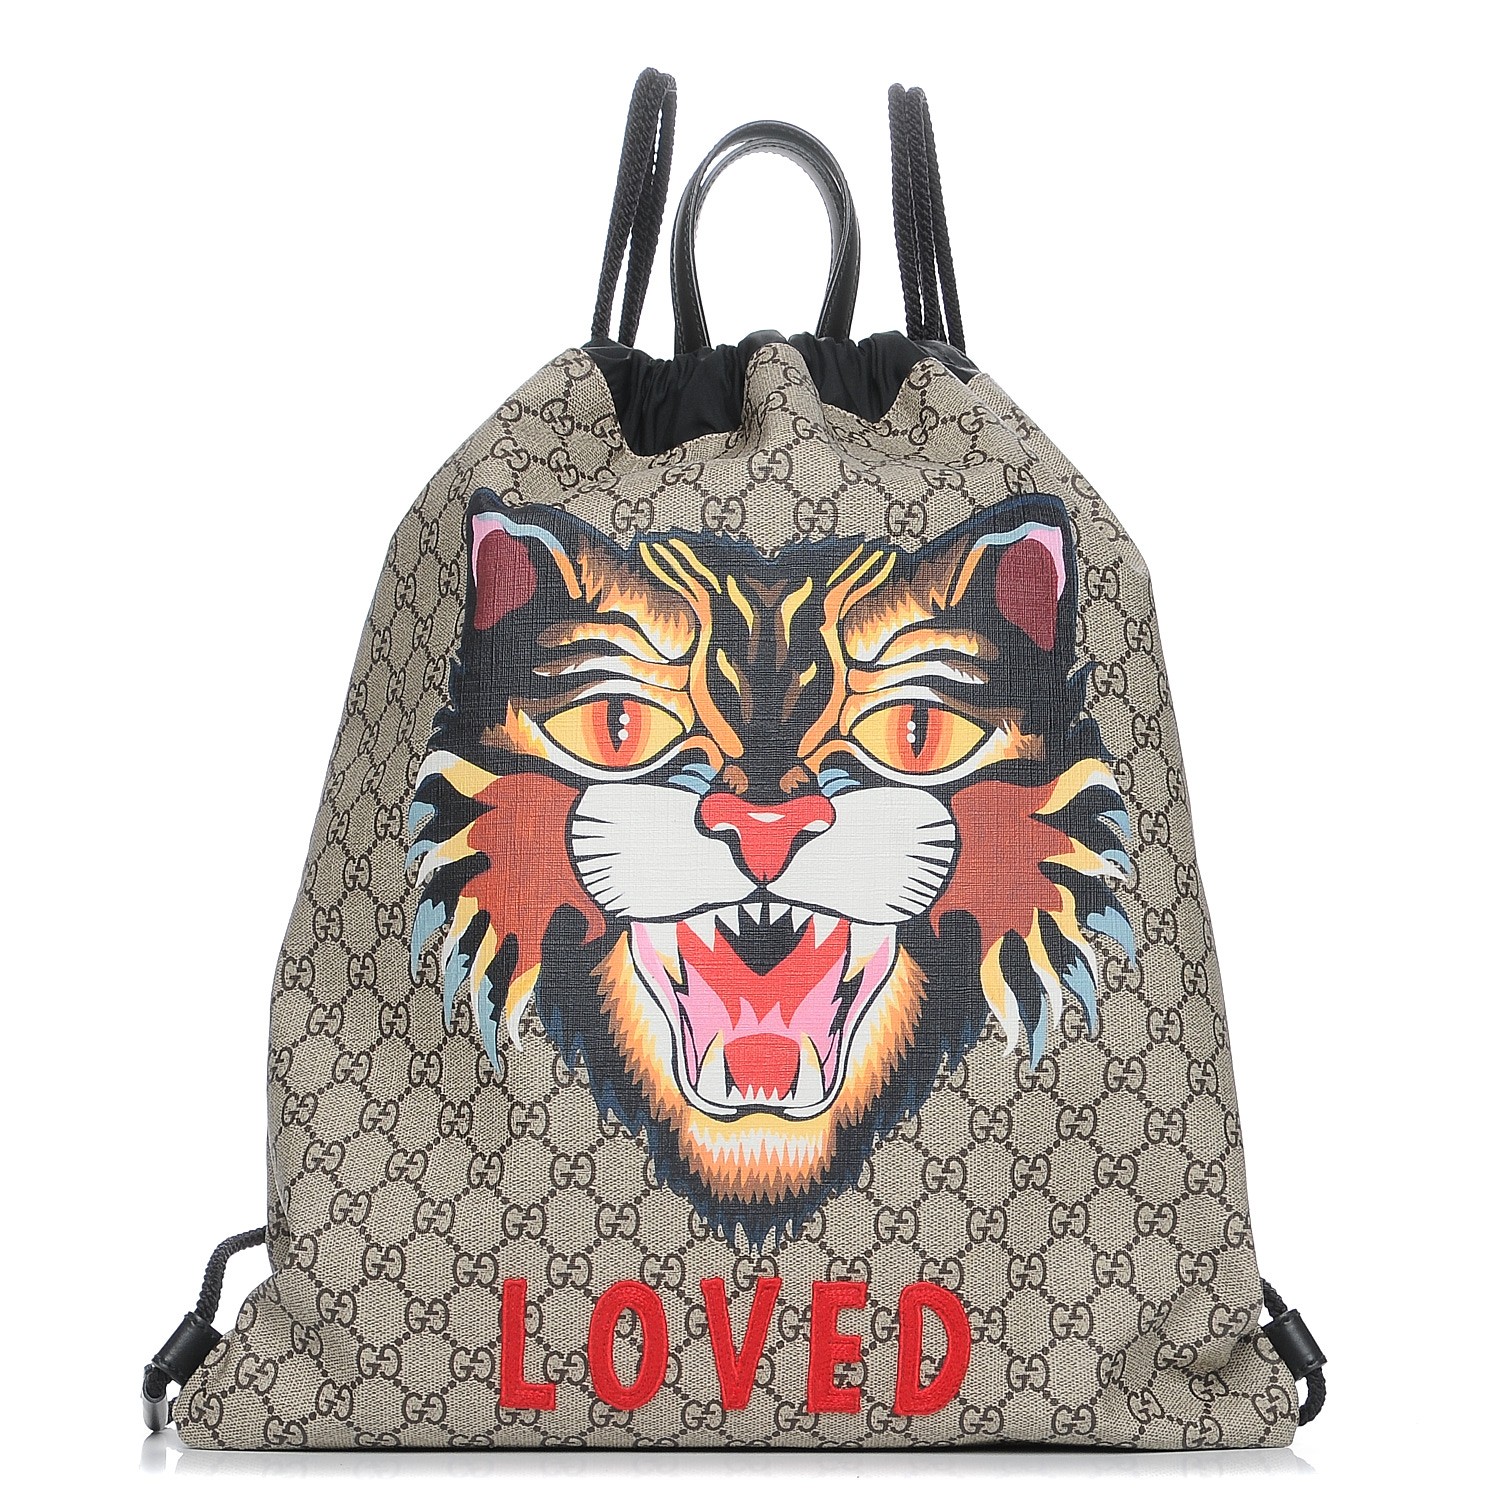 gucci angry cat bag